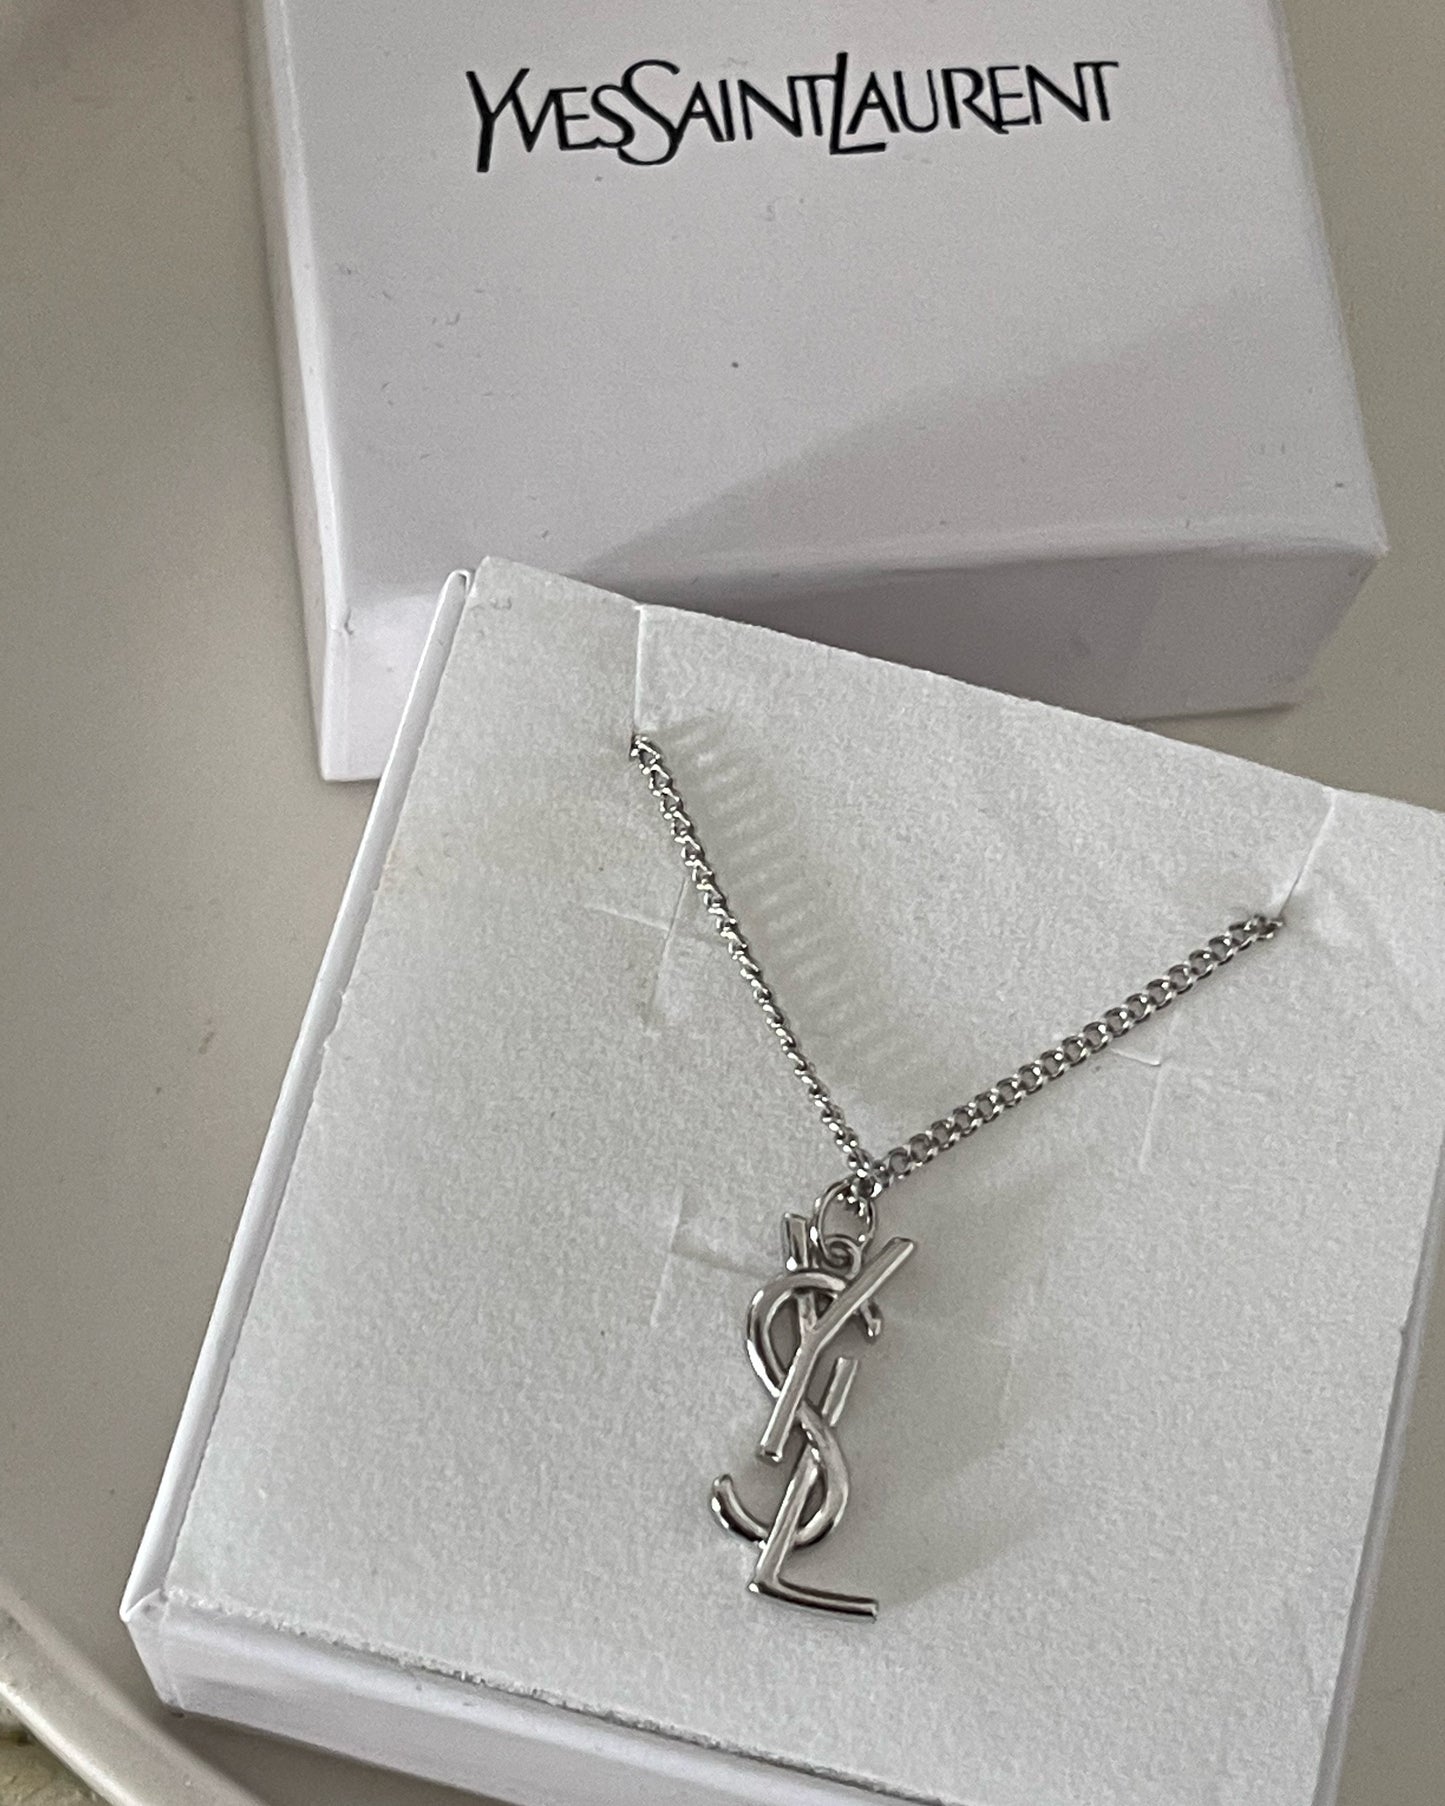 Ysl Necklace 